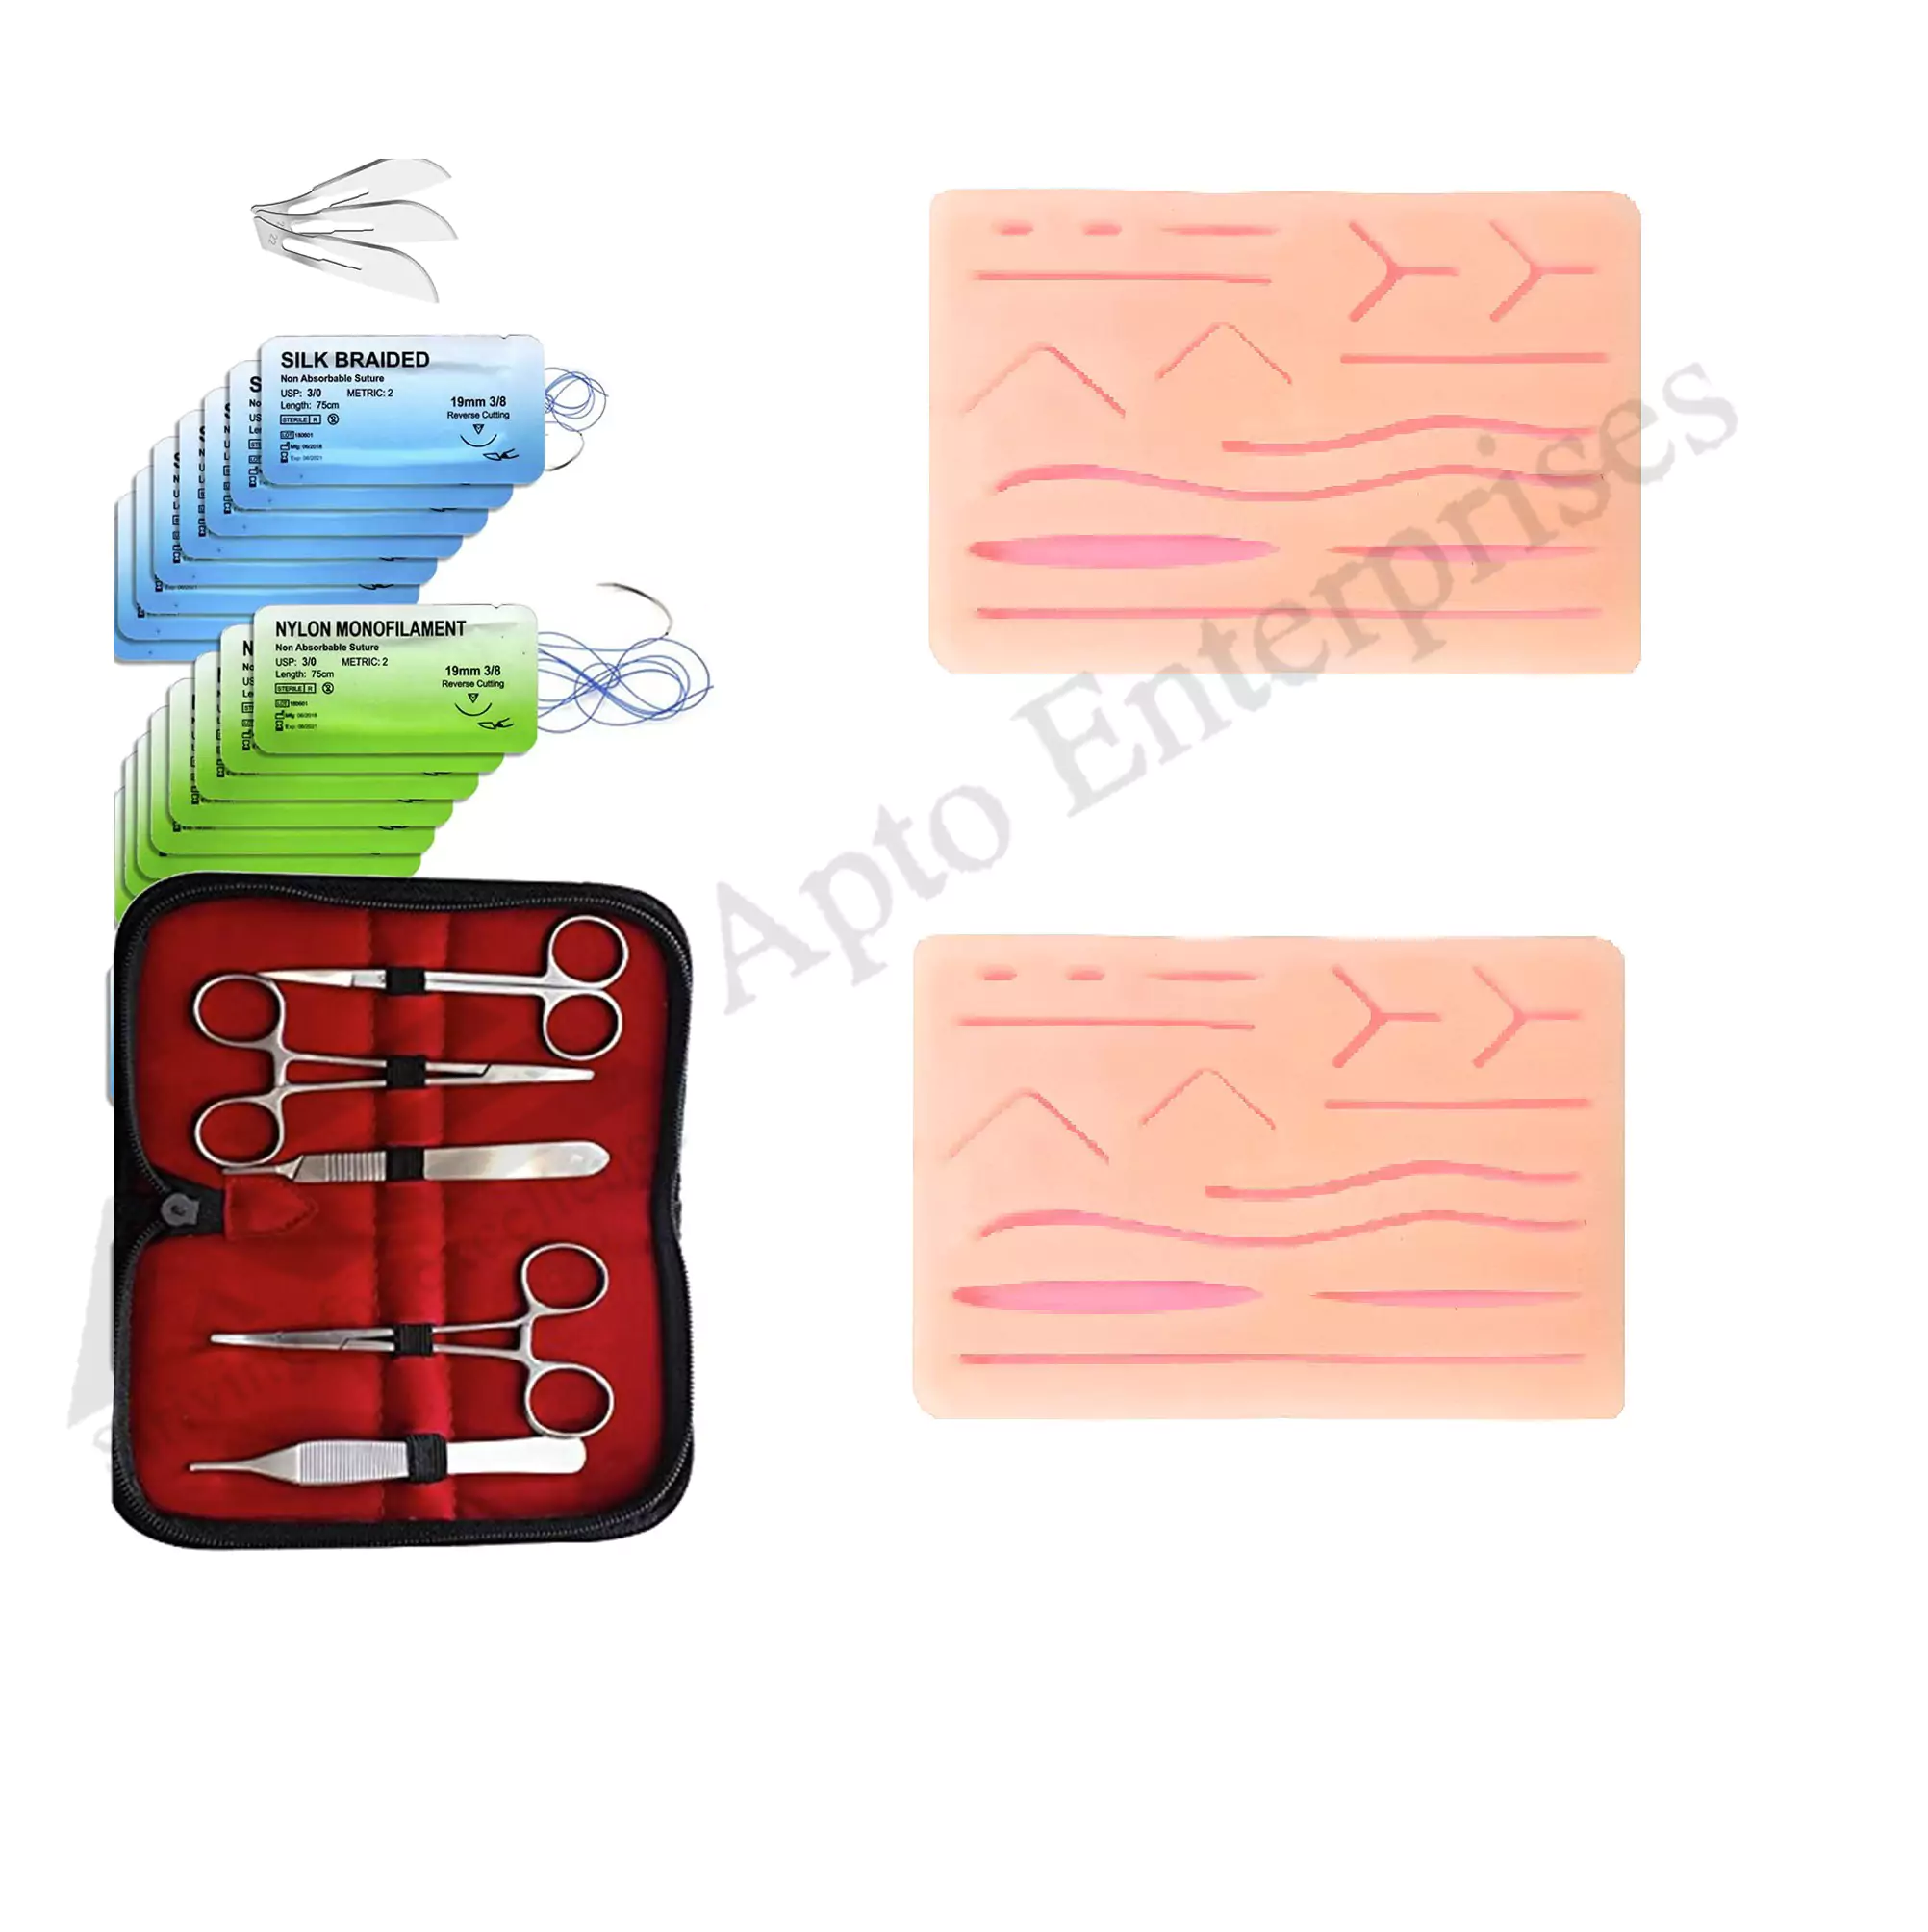 Surgical Suture Practice Kit with Suture Pad